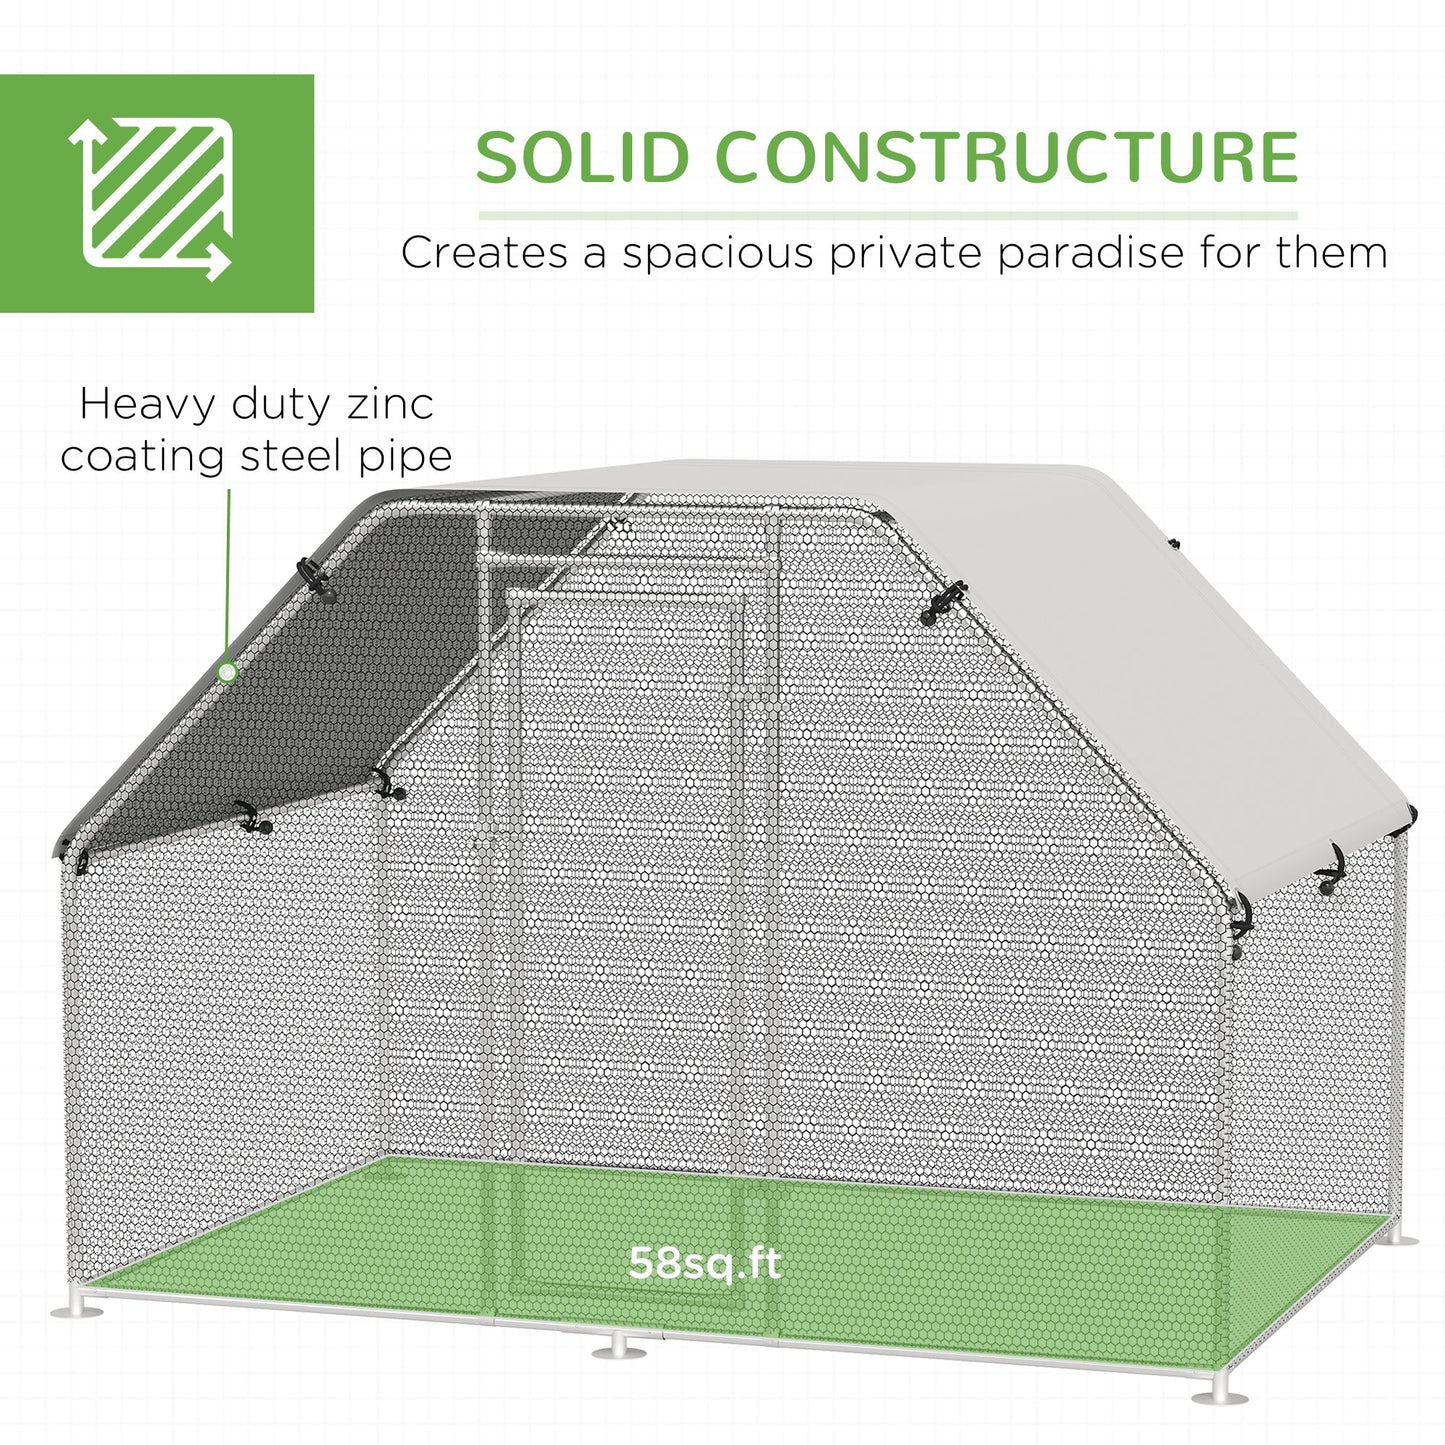 9.2' x 6.3' Metal Chicken Coop, Galvanized Walk-in Hen House, Poultry Cage Outdoor Backyard with Waterproof UV-Protection Cover for Rabbits, Ducks at Gallery Canada